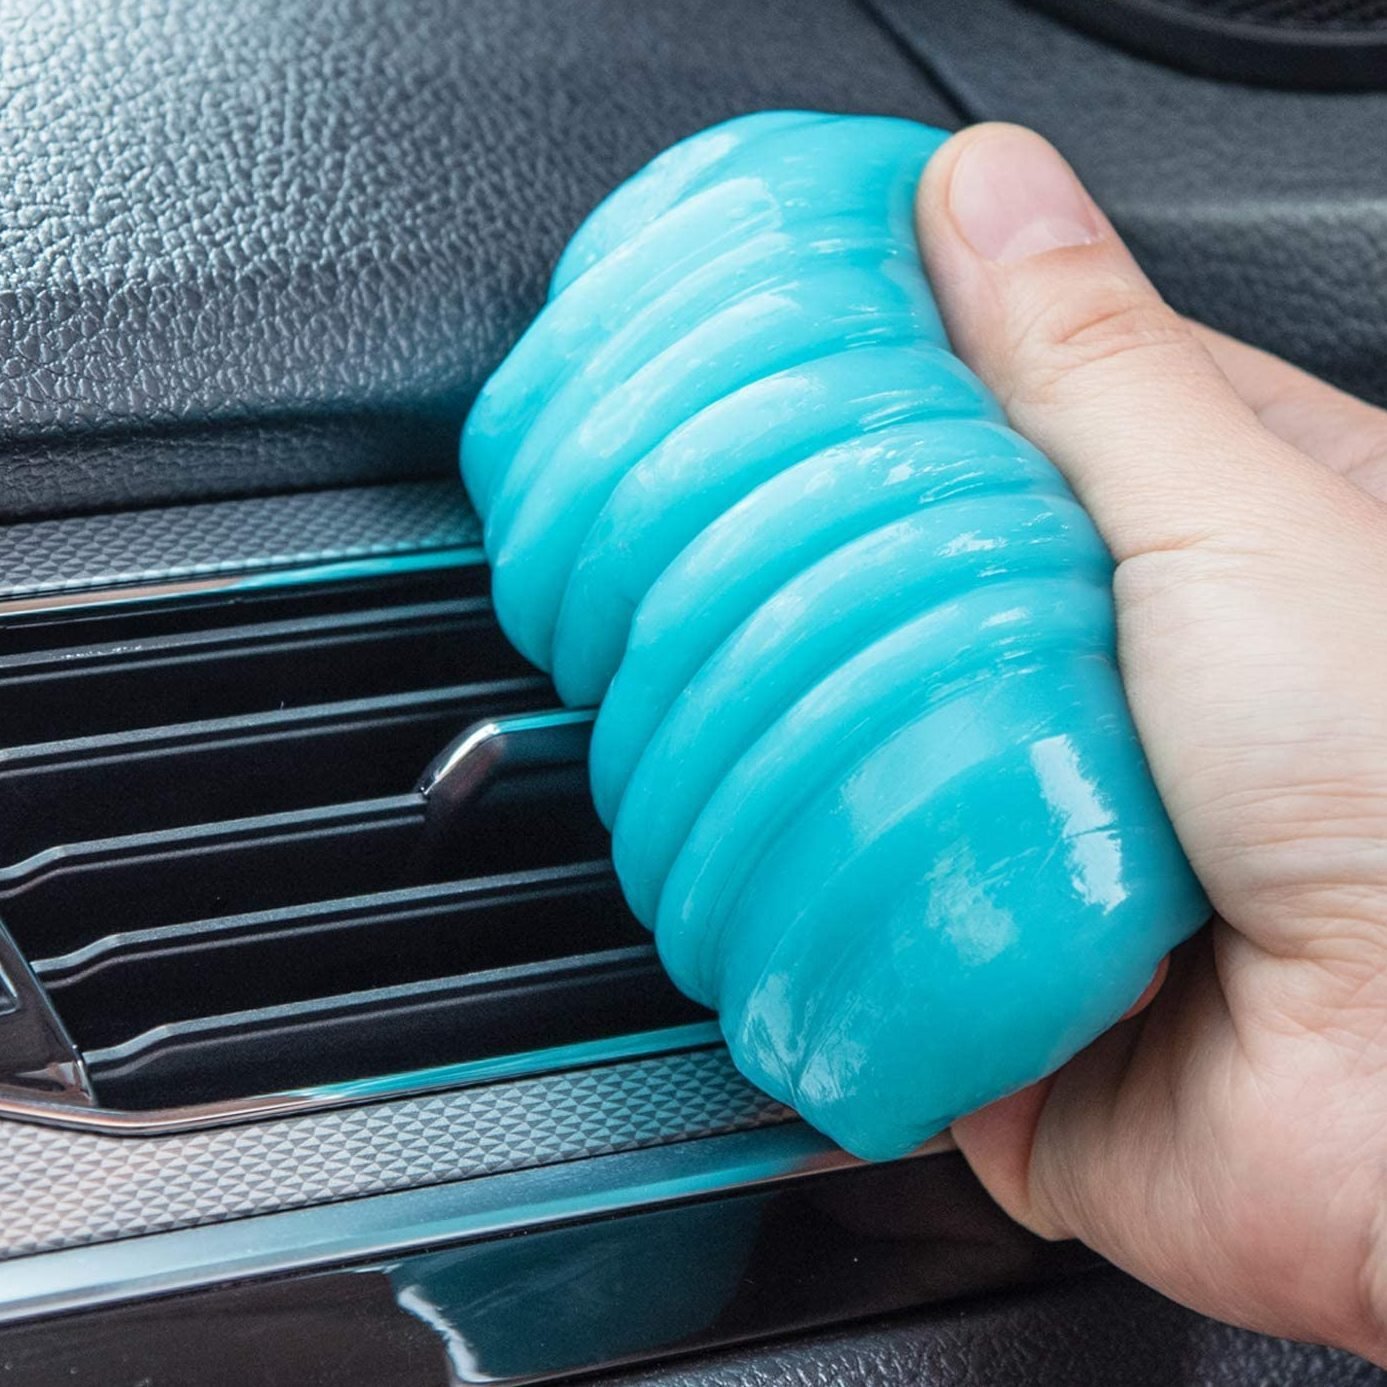 Car Cleaning Gels